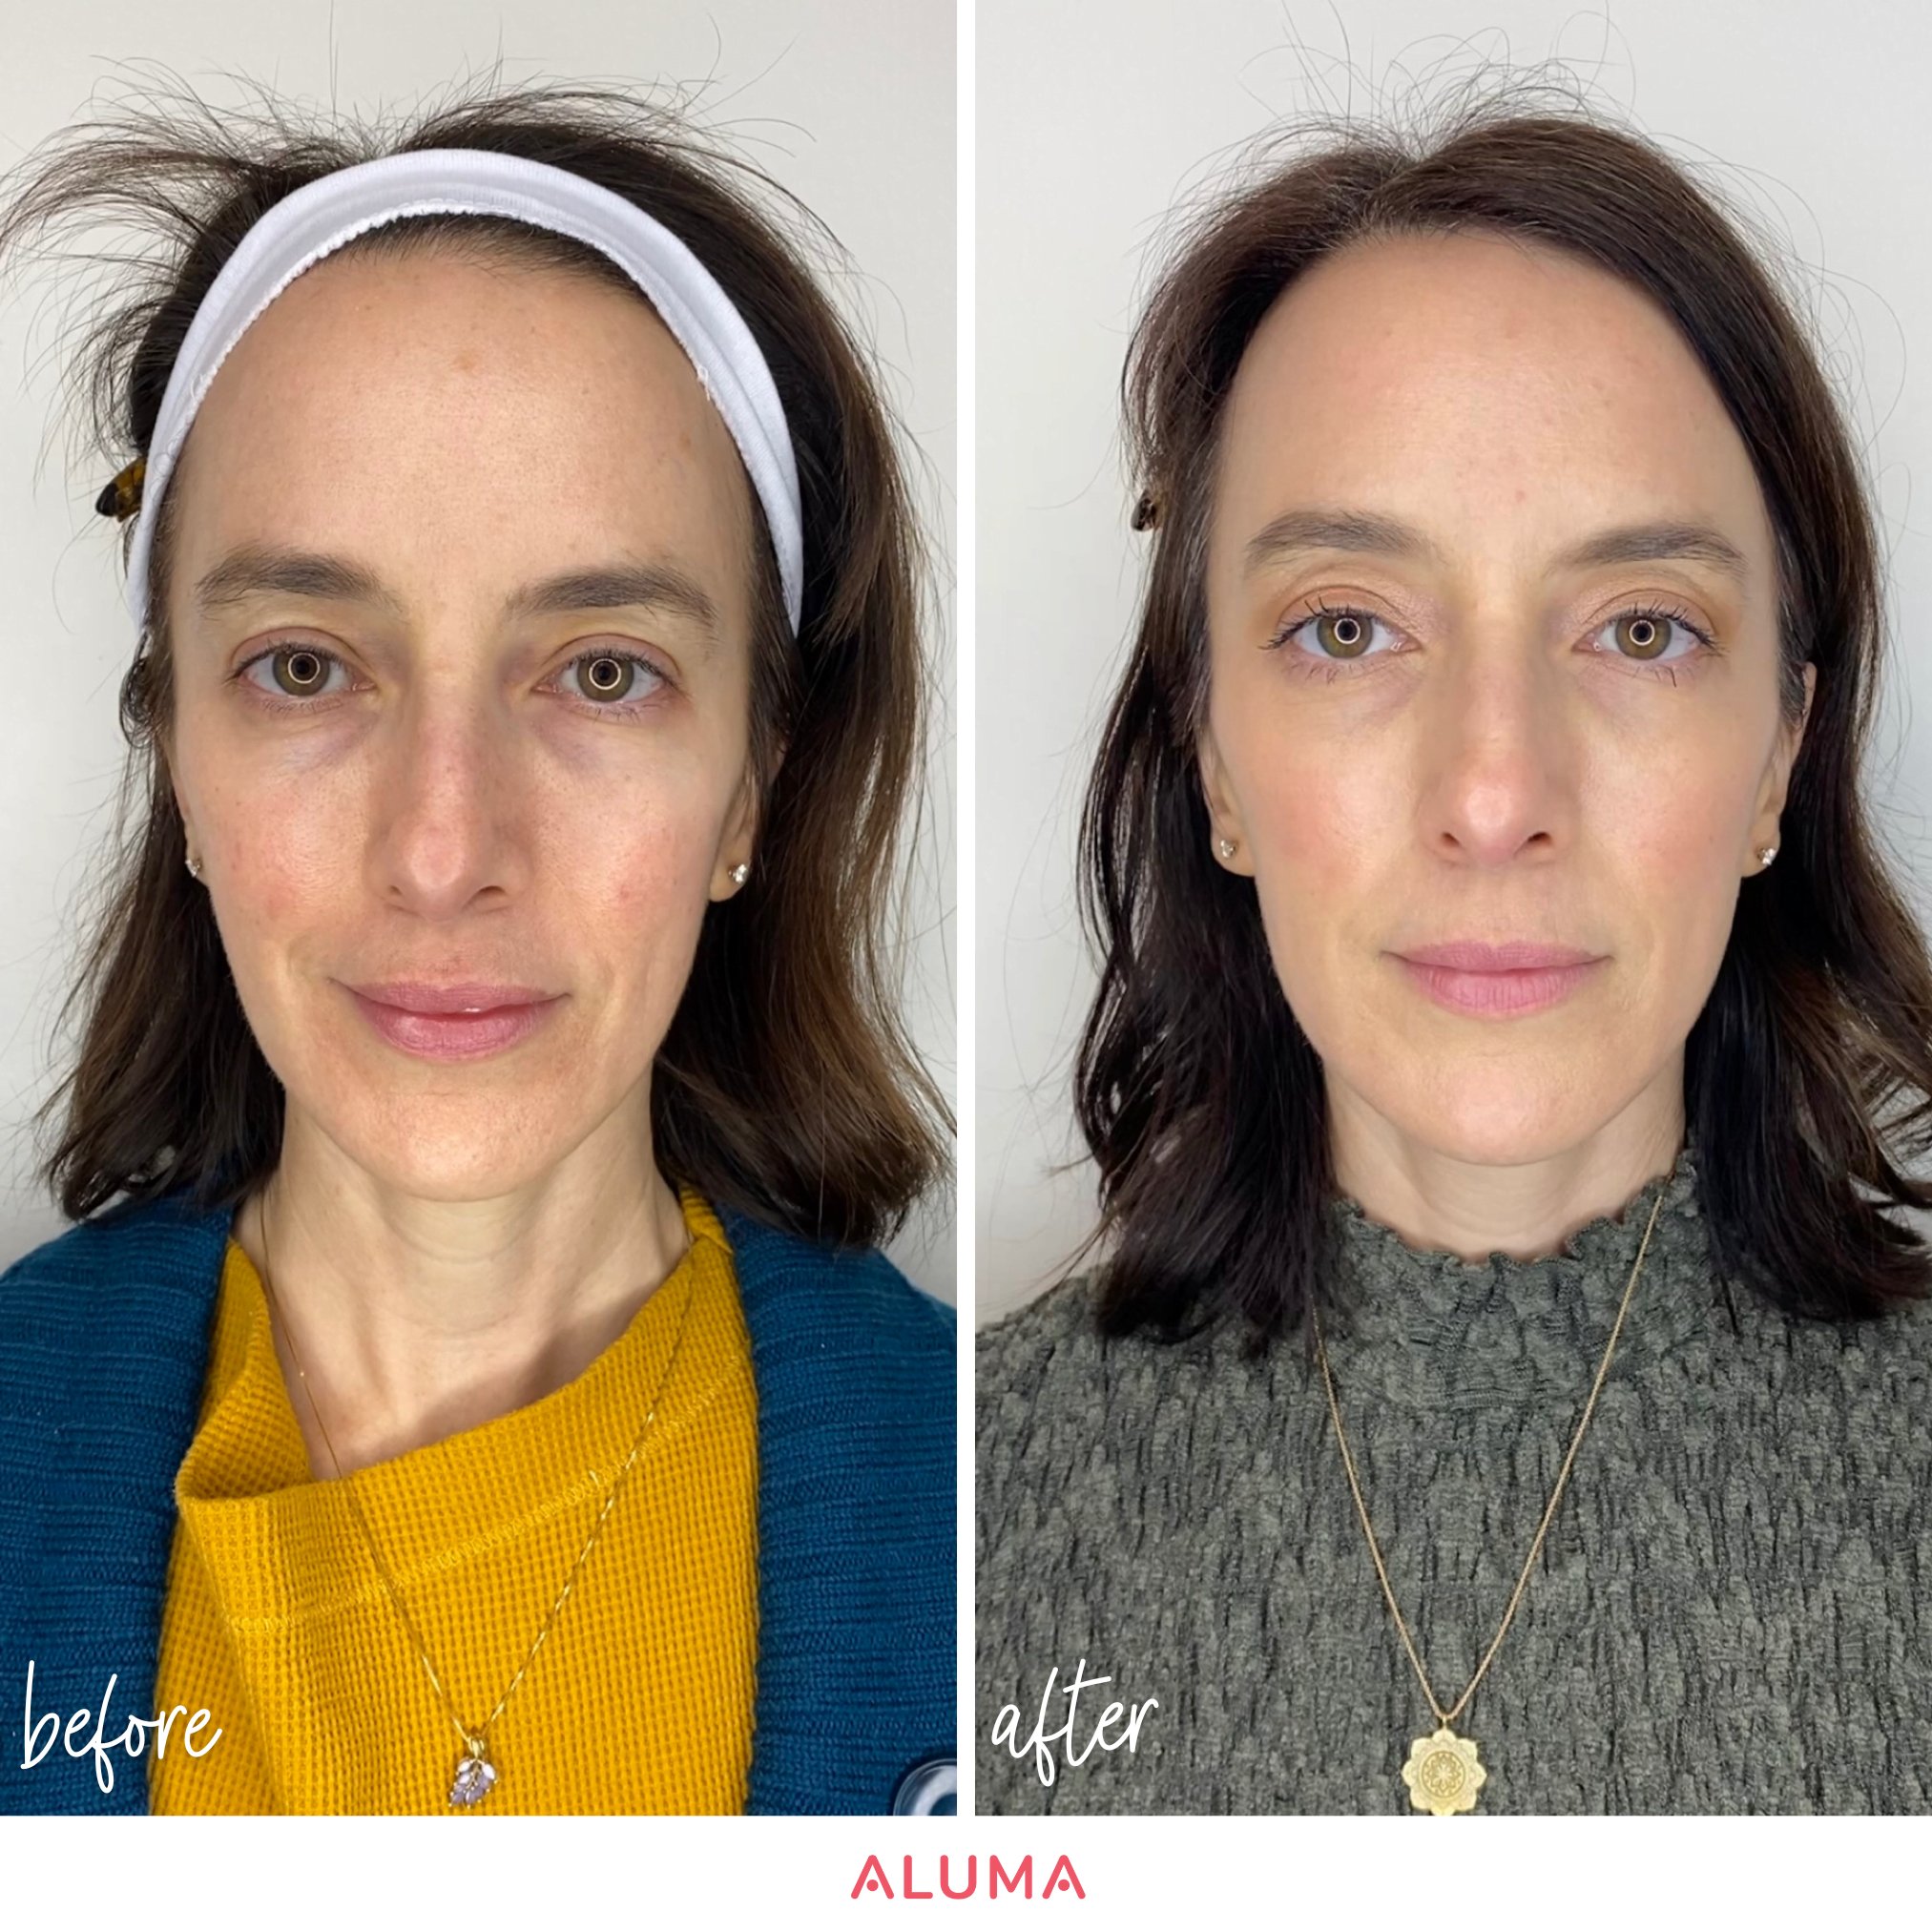 n this photo, you can see the bio-stimulating positive effects, such as volumized skin, tighter jawline, and an overall refreshed appearance of a Sculptra treatment from a woman who was treated at Aluma Aesthetic Medicine in Portland, Oregon. This picture is a before and after photo shot in frontal view.